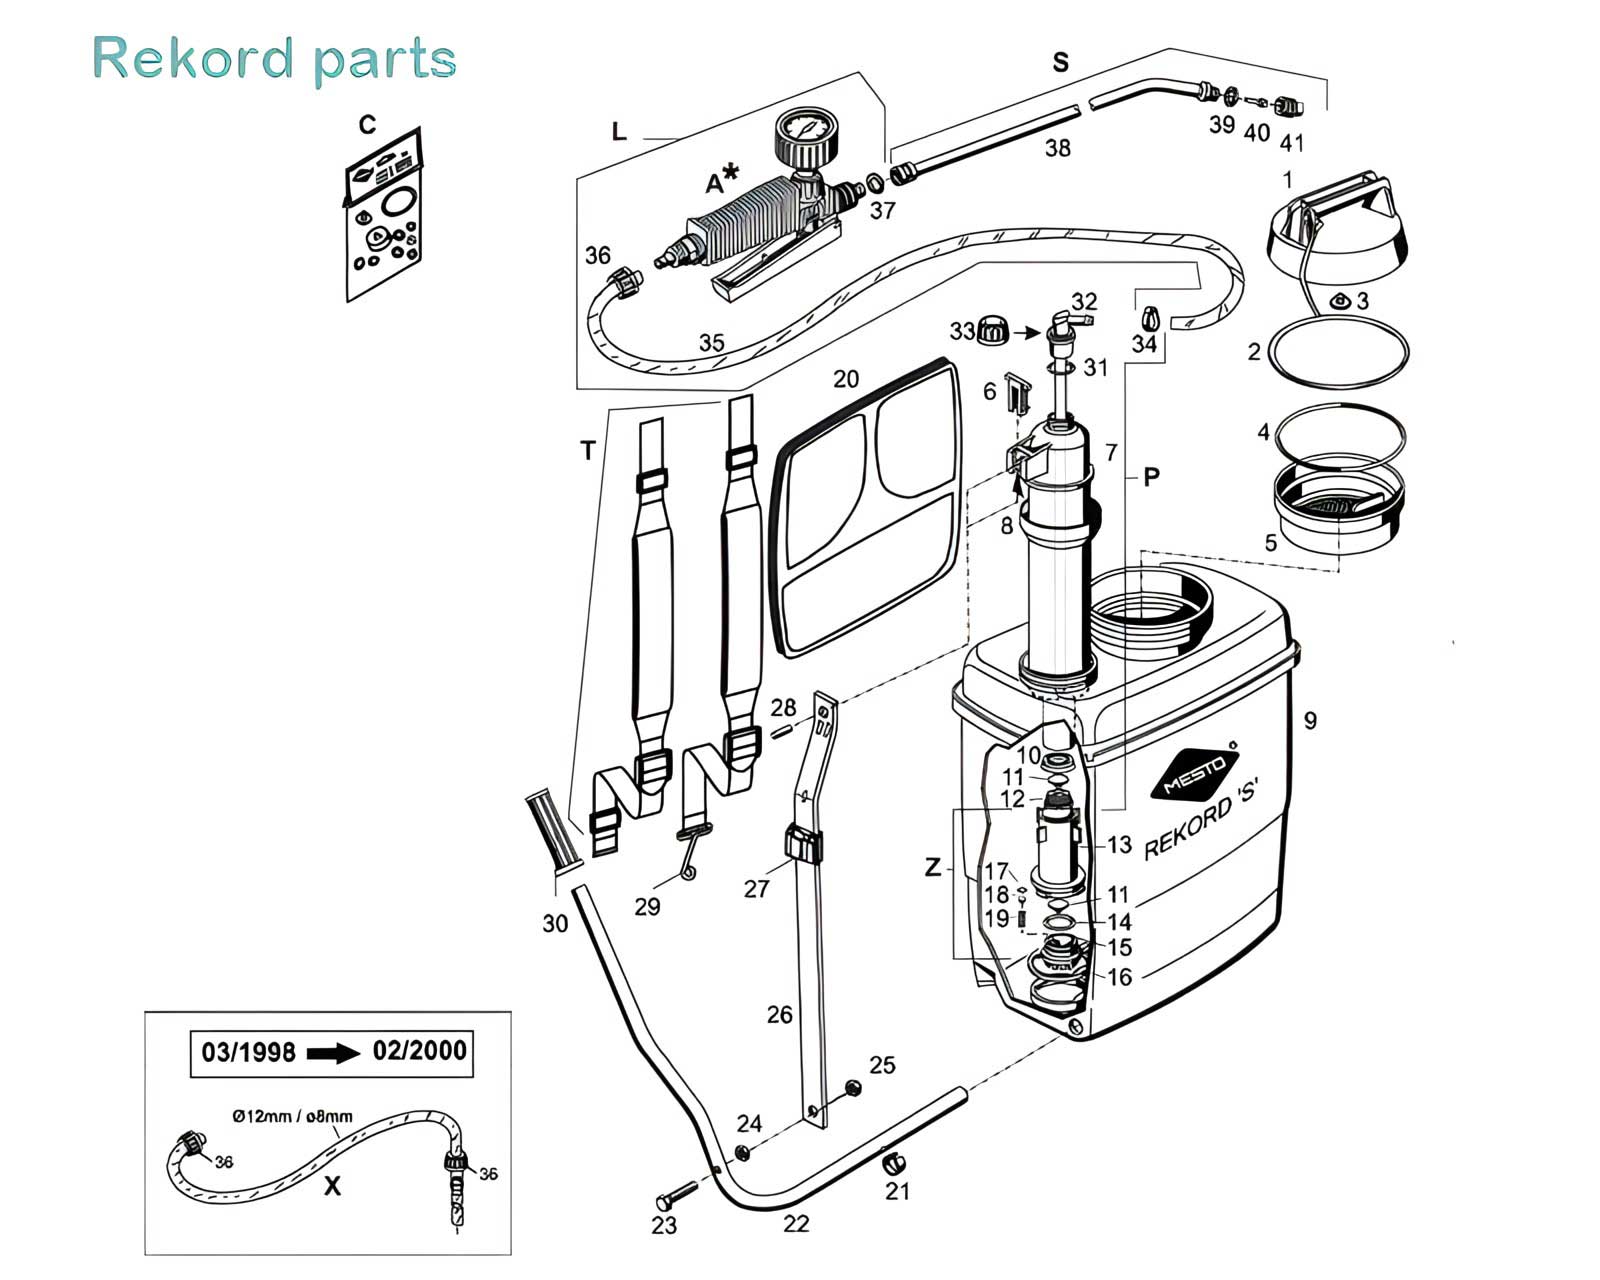 Rekord model#3533 - exploded diagram of parts